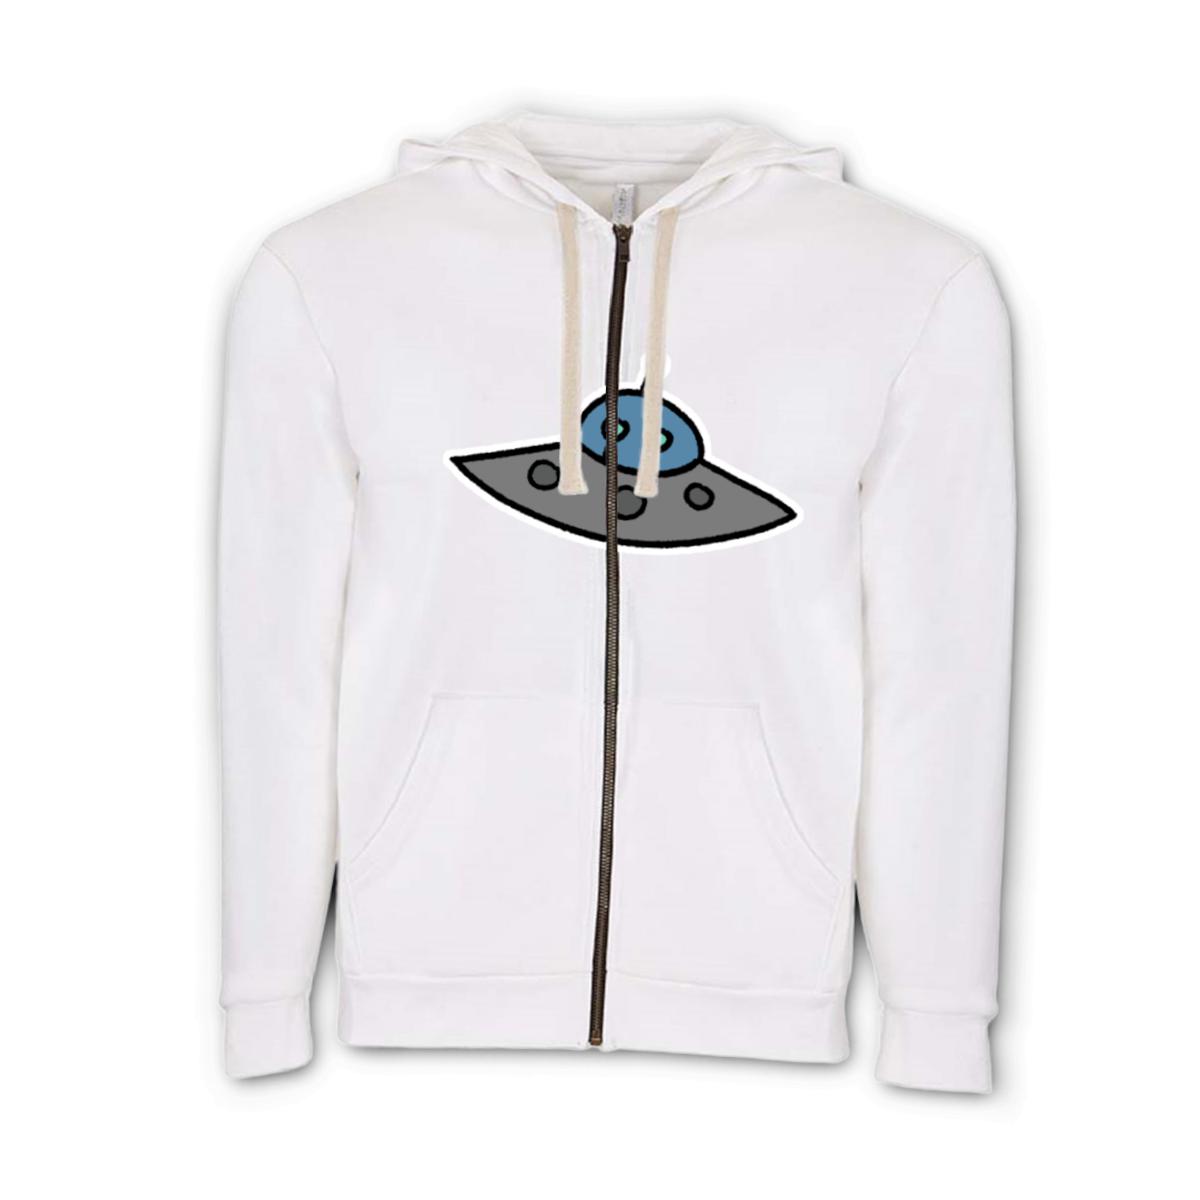 Flying Saucer Unisex Zip Hoodie Small white